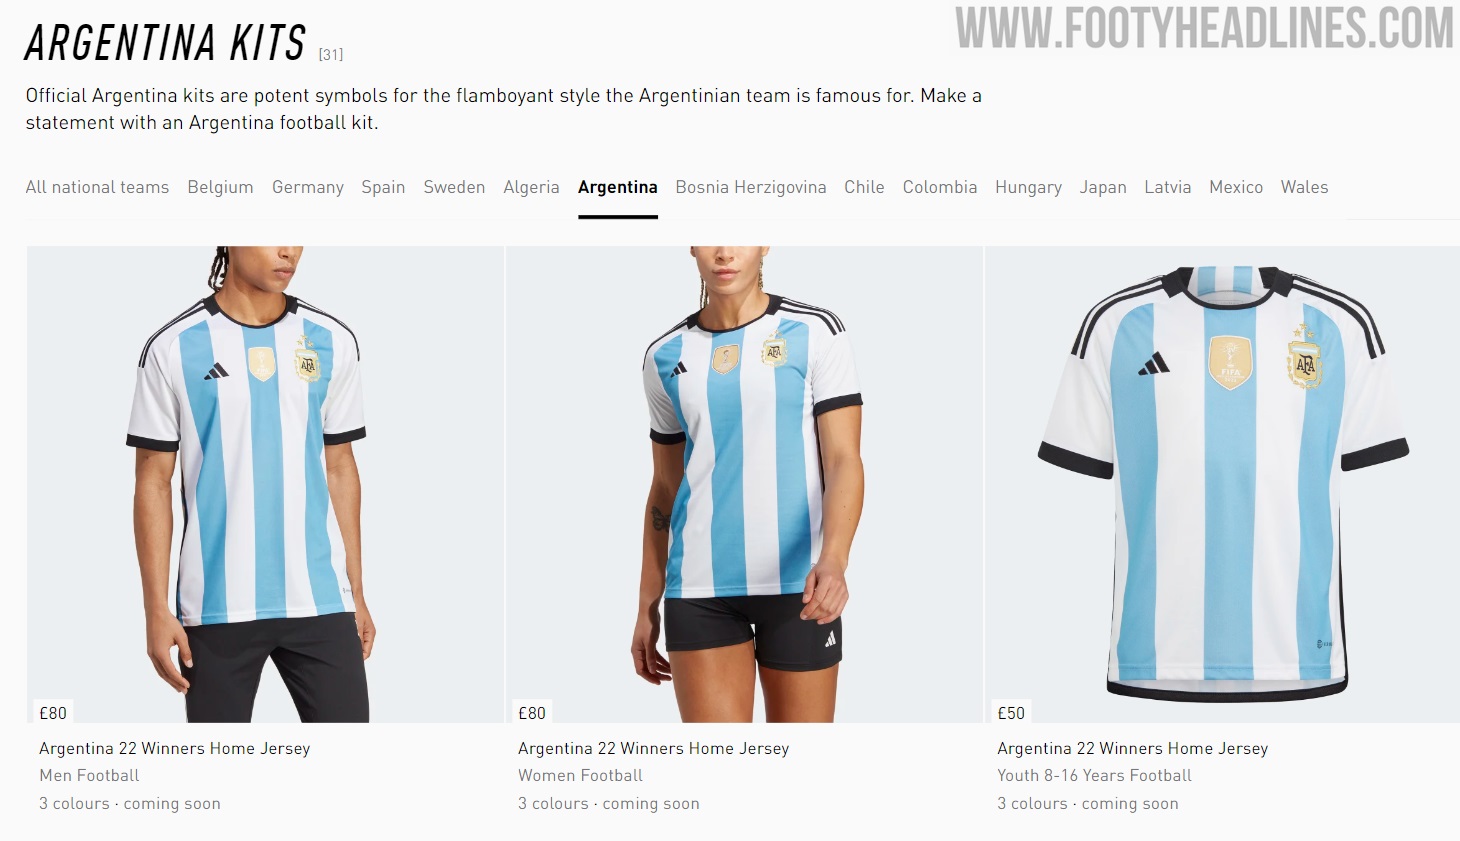 Adidas to Release Authentic & Away Argentina 3 Stars Kits? - Footy Headlines